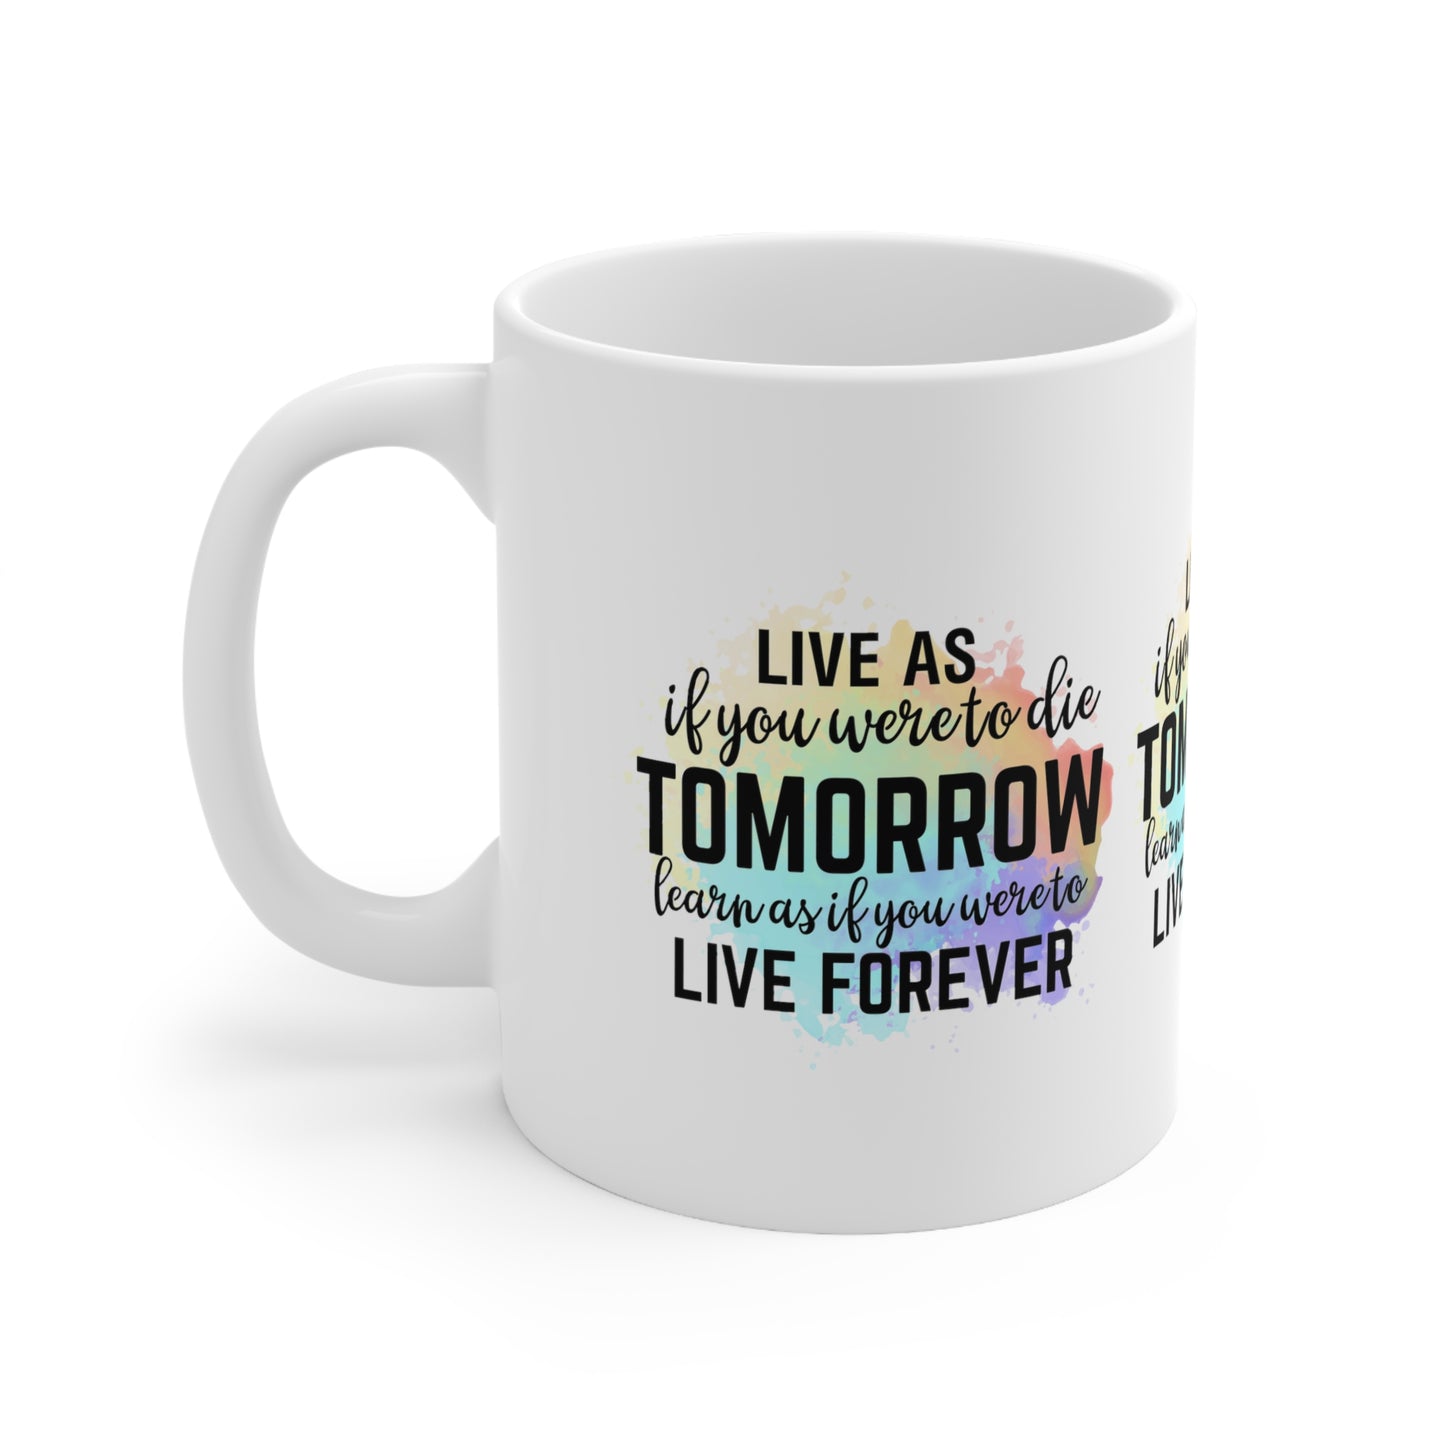 "LIVE as you were to die Tomorrow. LEARN as if you were to Live Forever" Mug - Musgcity23™️ Free Shipping!